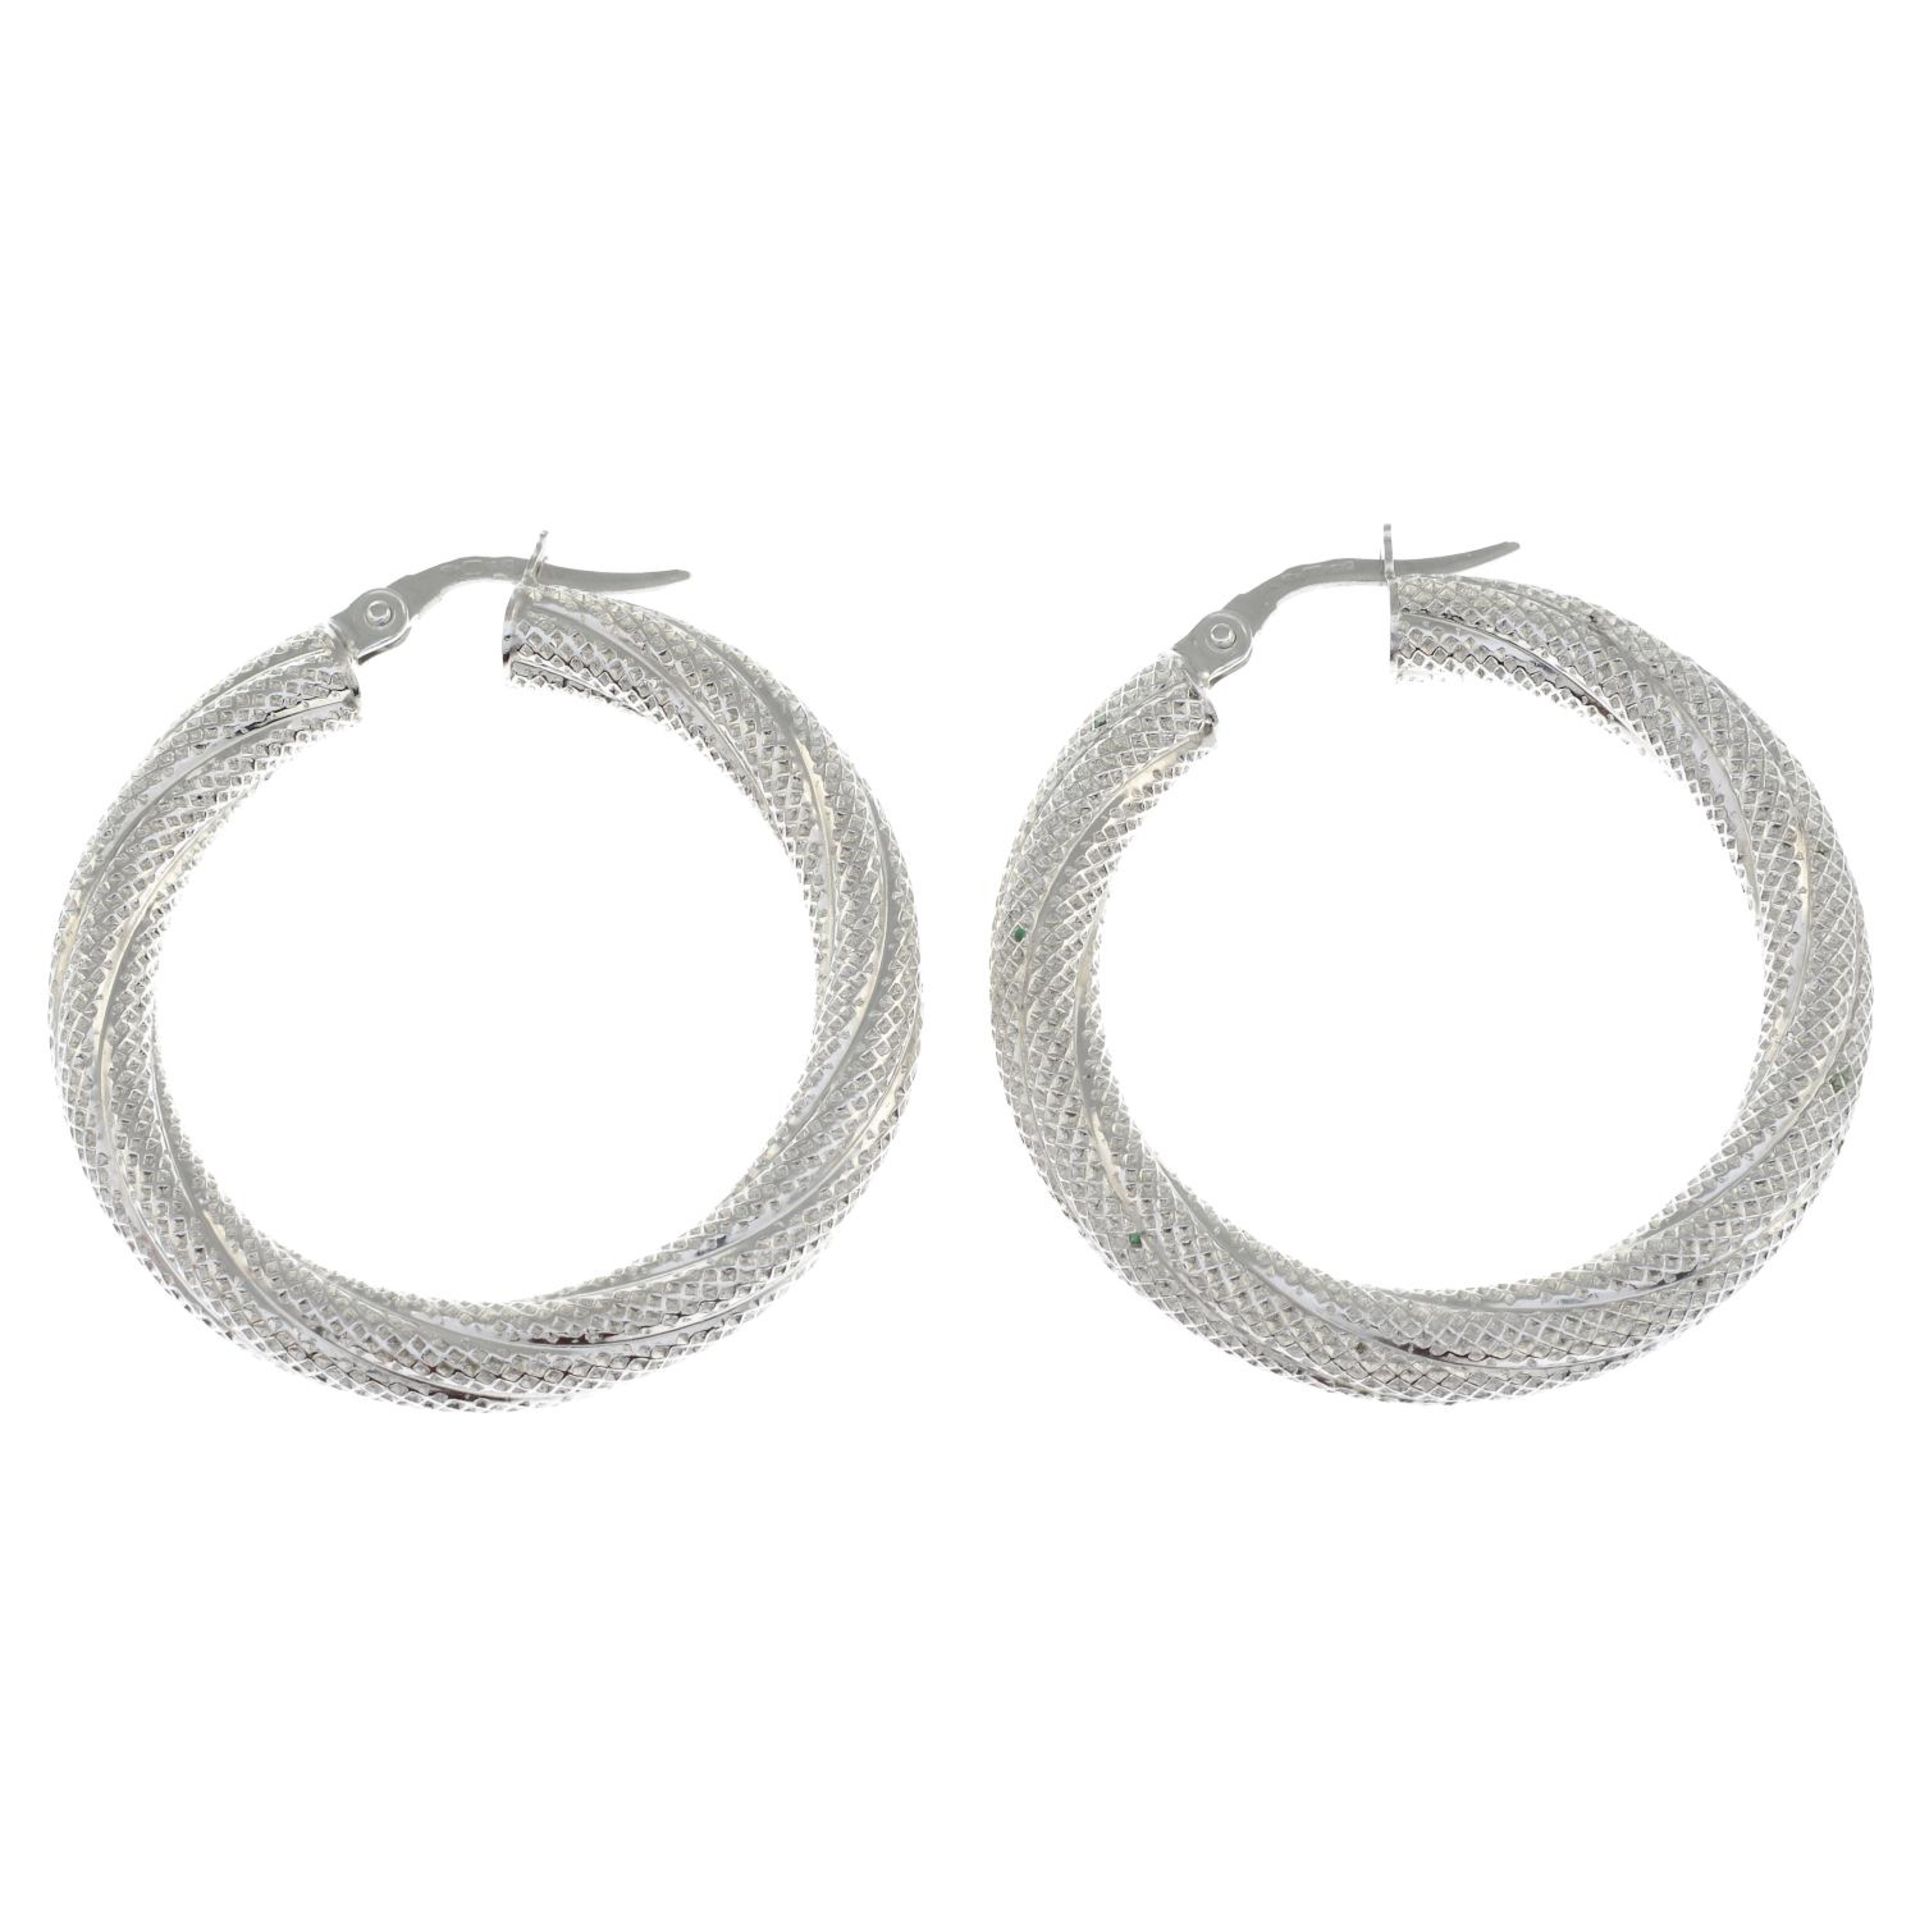 A pair of 9ct gold textured hoop earrings.Hallmarks for 9ct gold.